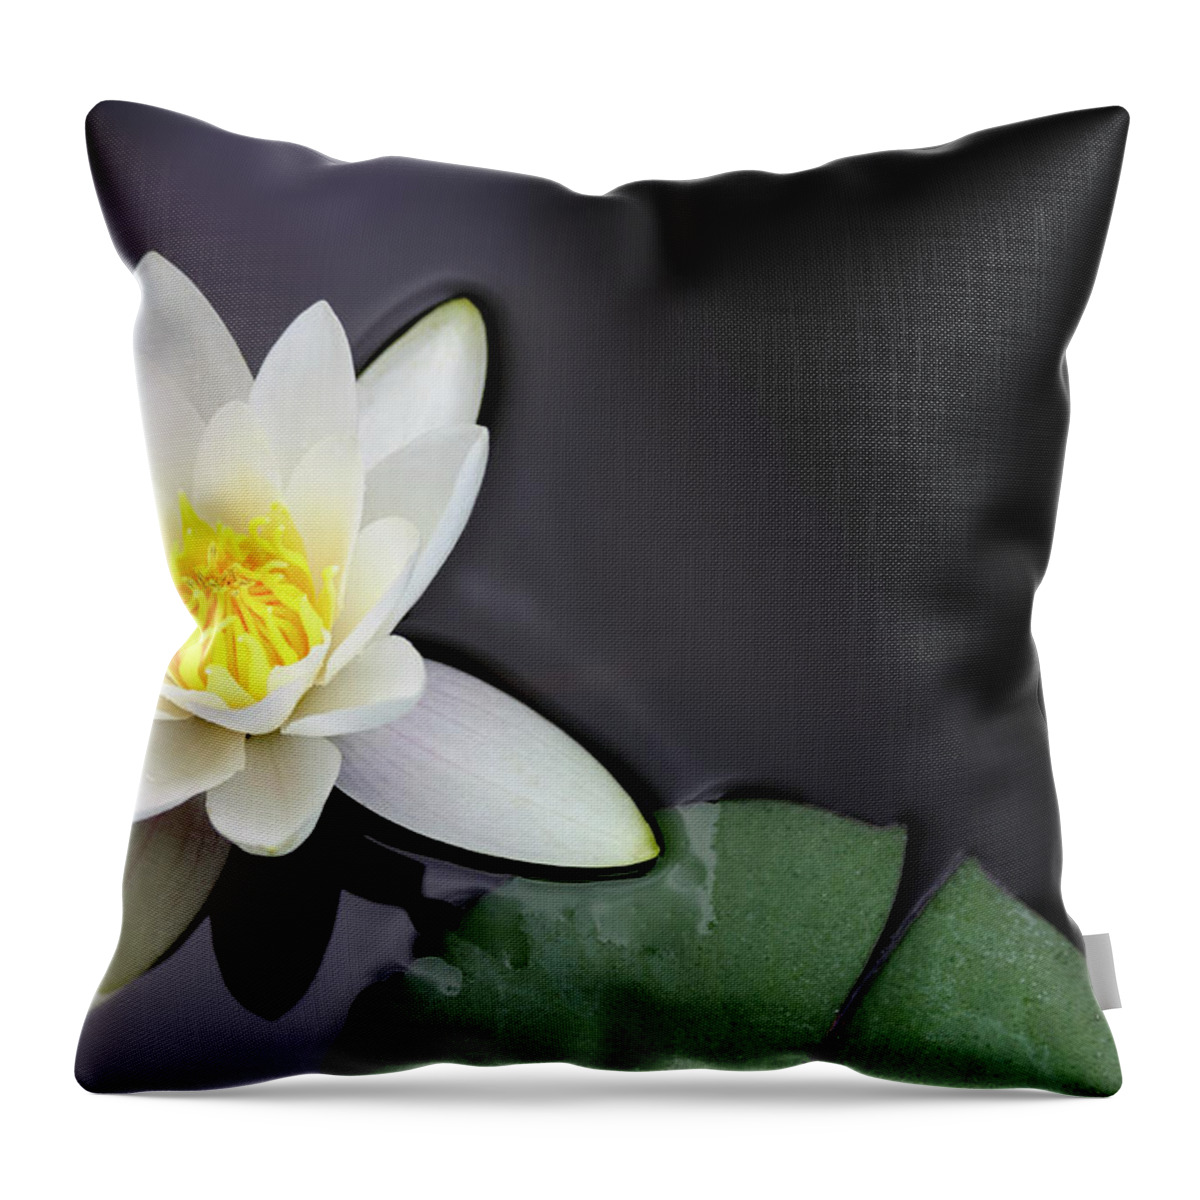 Black Color Throw Pillow featuring the photograph White Water Lily Nymphaea Alba Floating by Seraficus